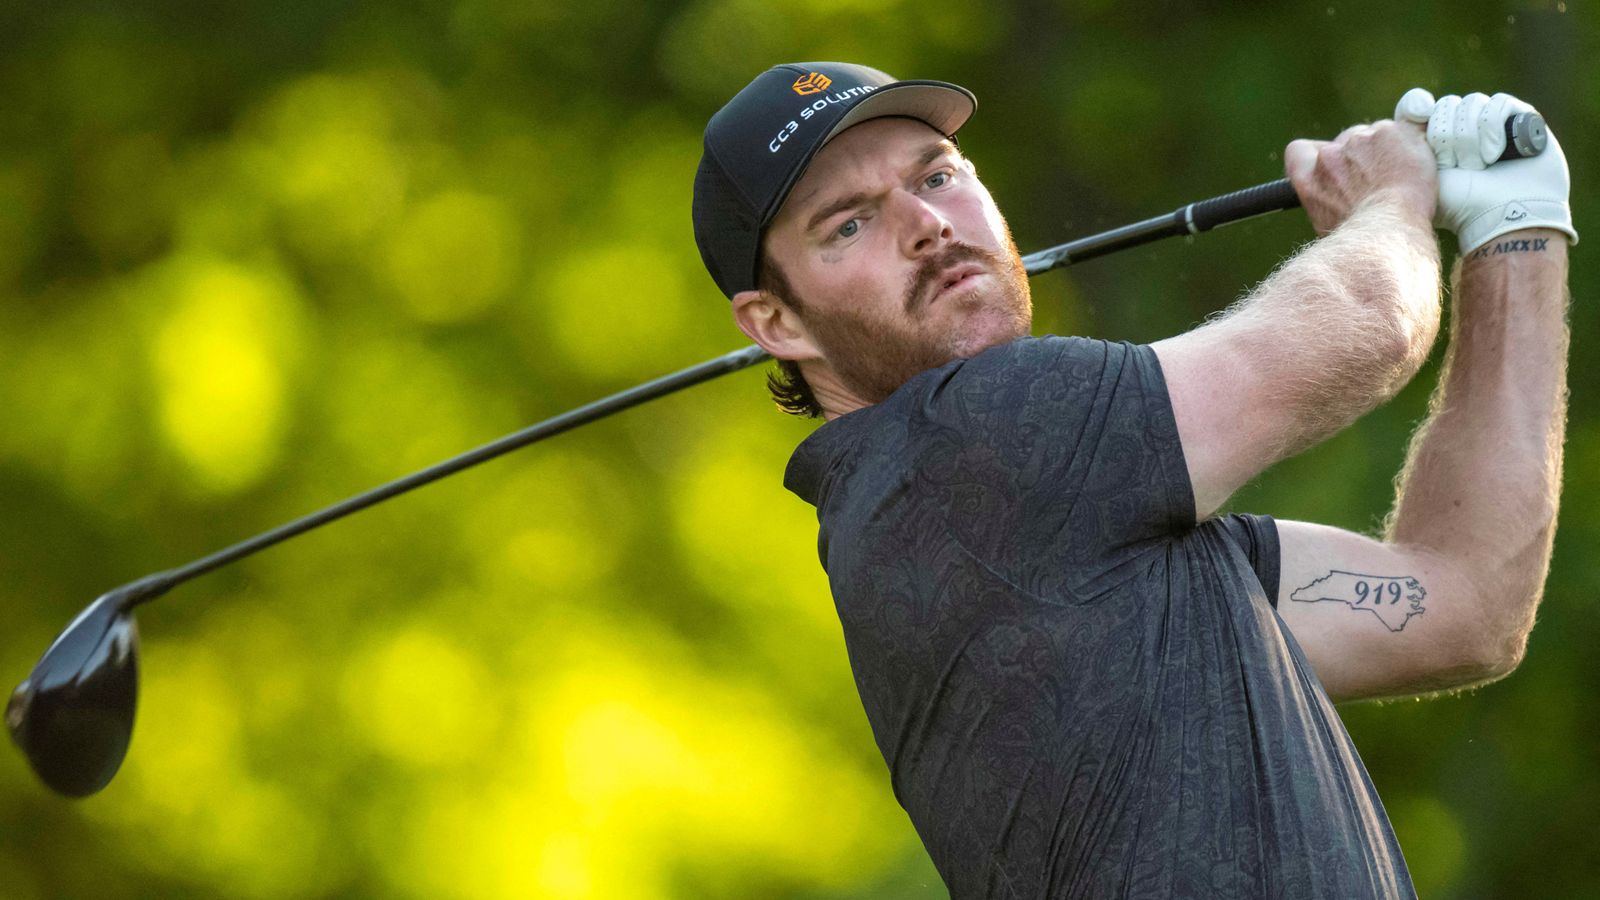 Grayson Murray: PGA Tour golfer who died aged 30 took his own life, parents say